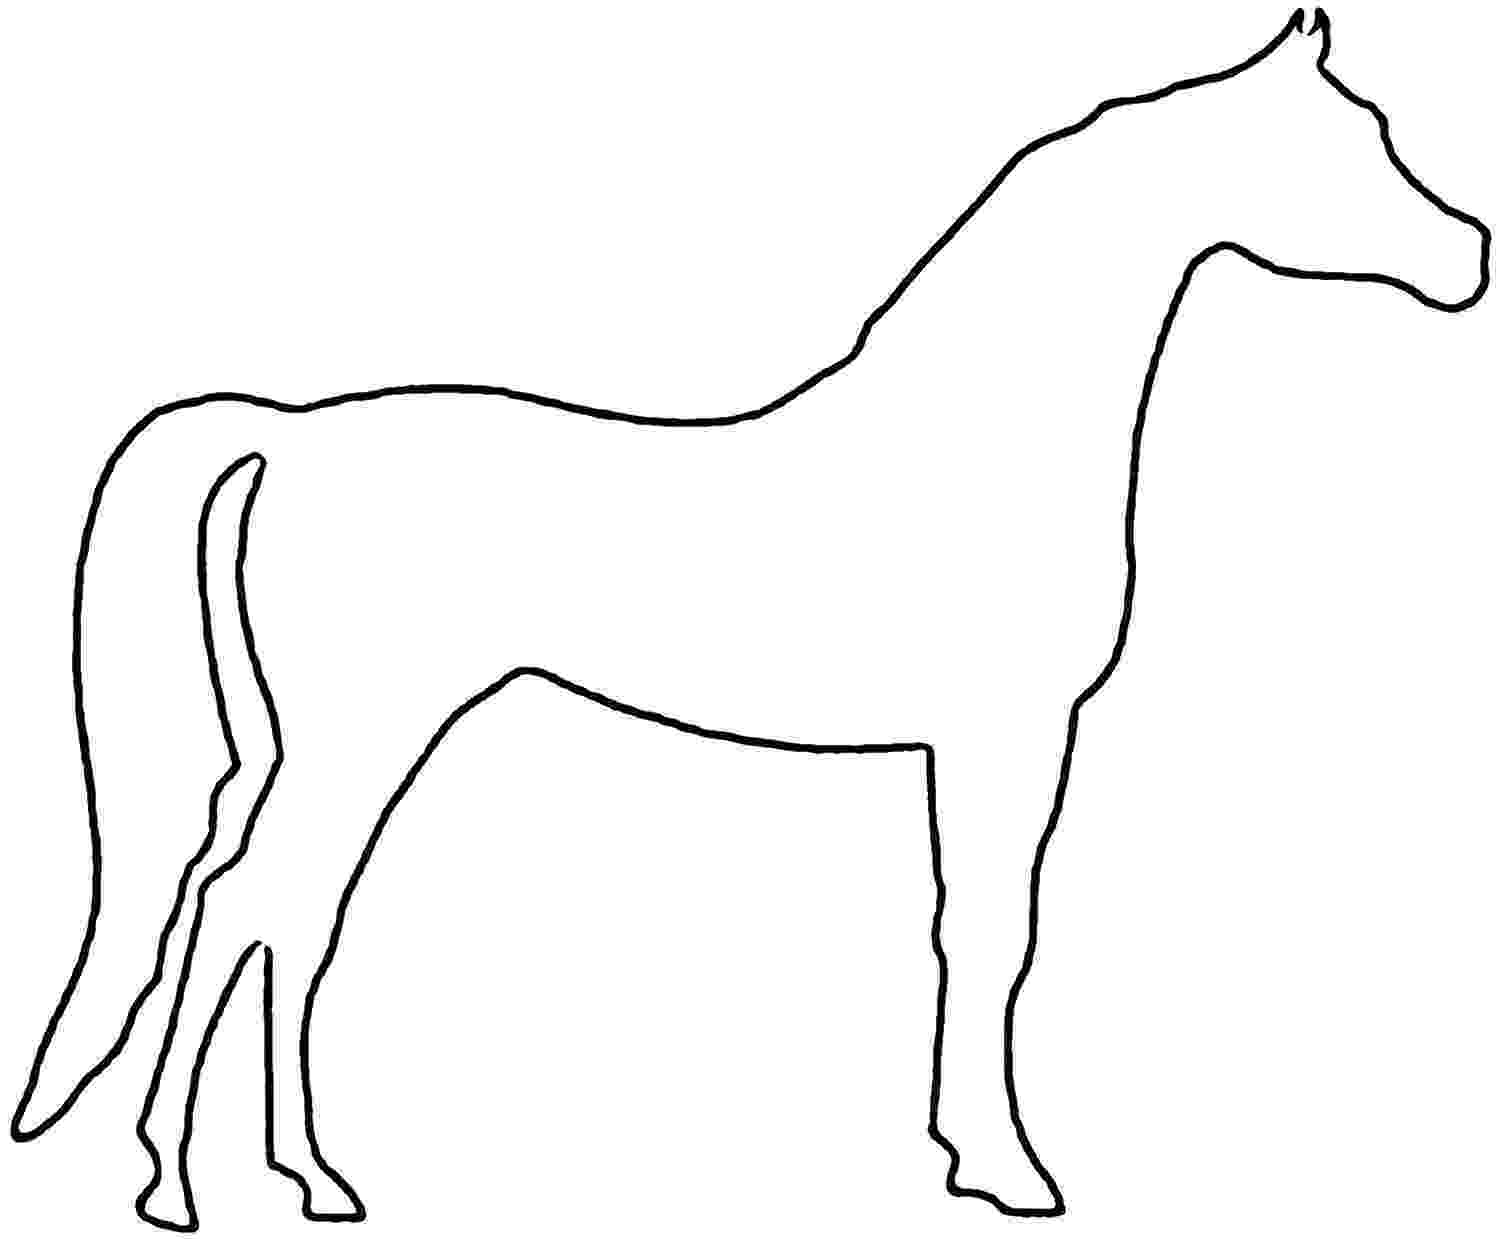 arabian horse pictures to print realistic horse coloring pages for adults coloring pages print pictures arabian horse to 